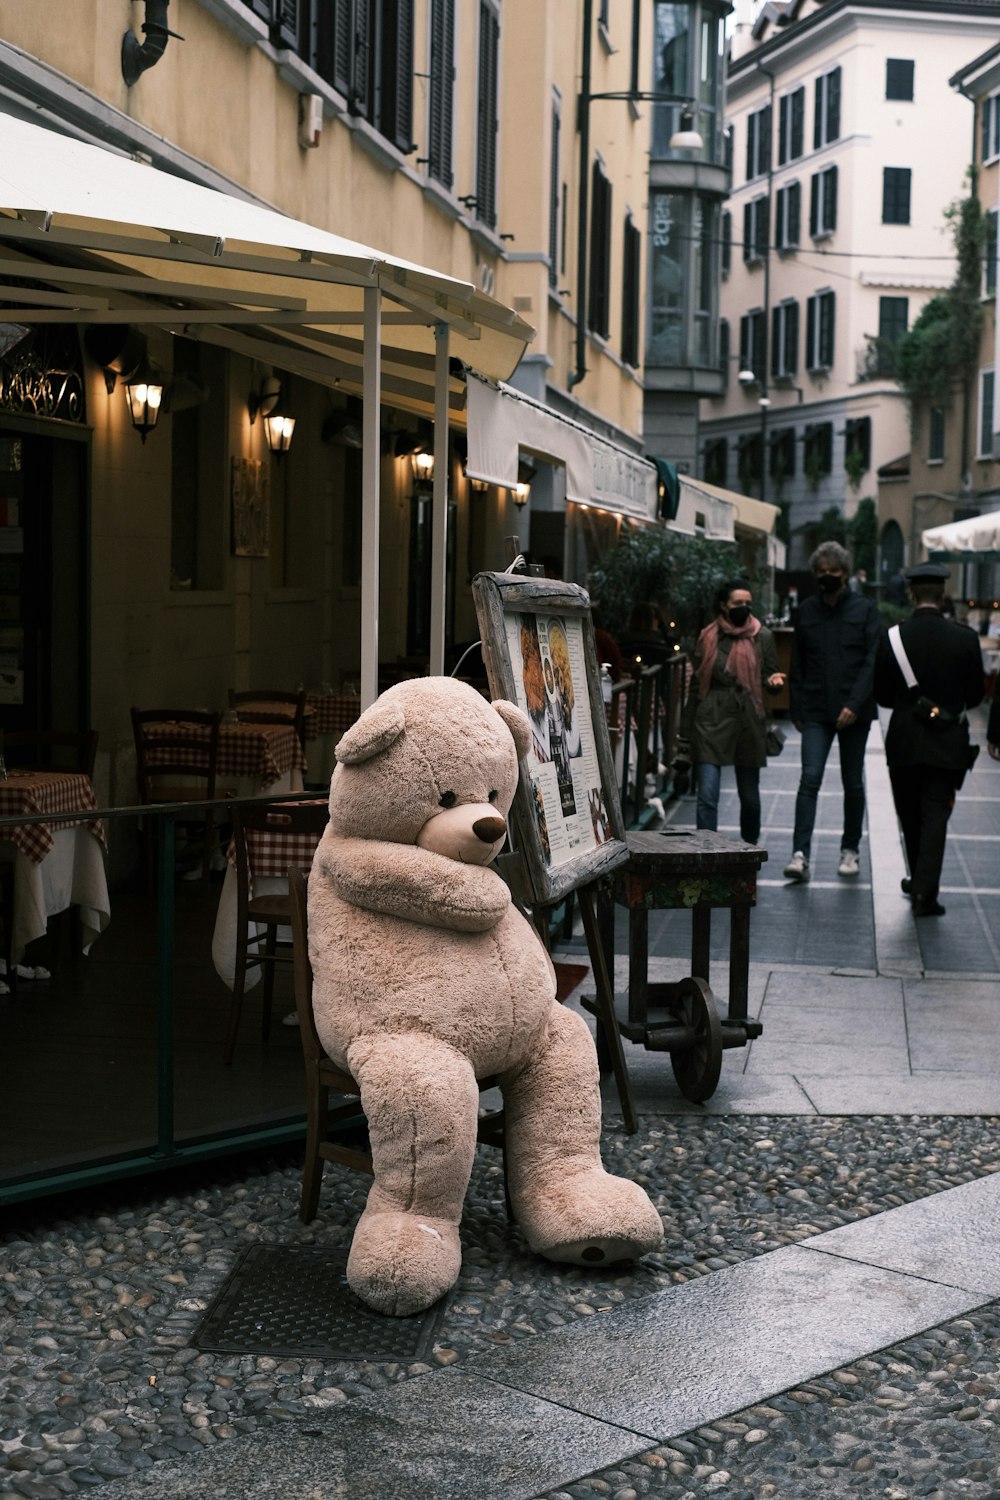 a large teddy bear sitting on the ground in front of a building